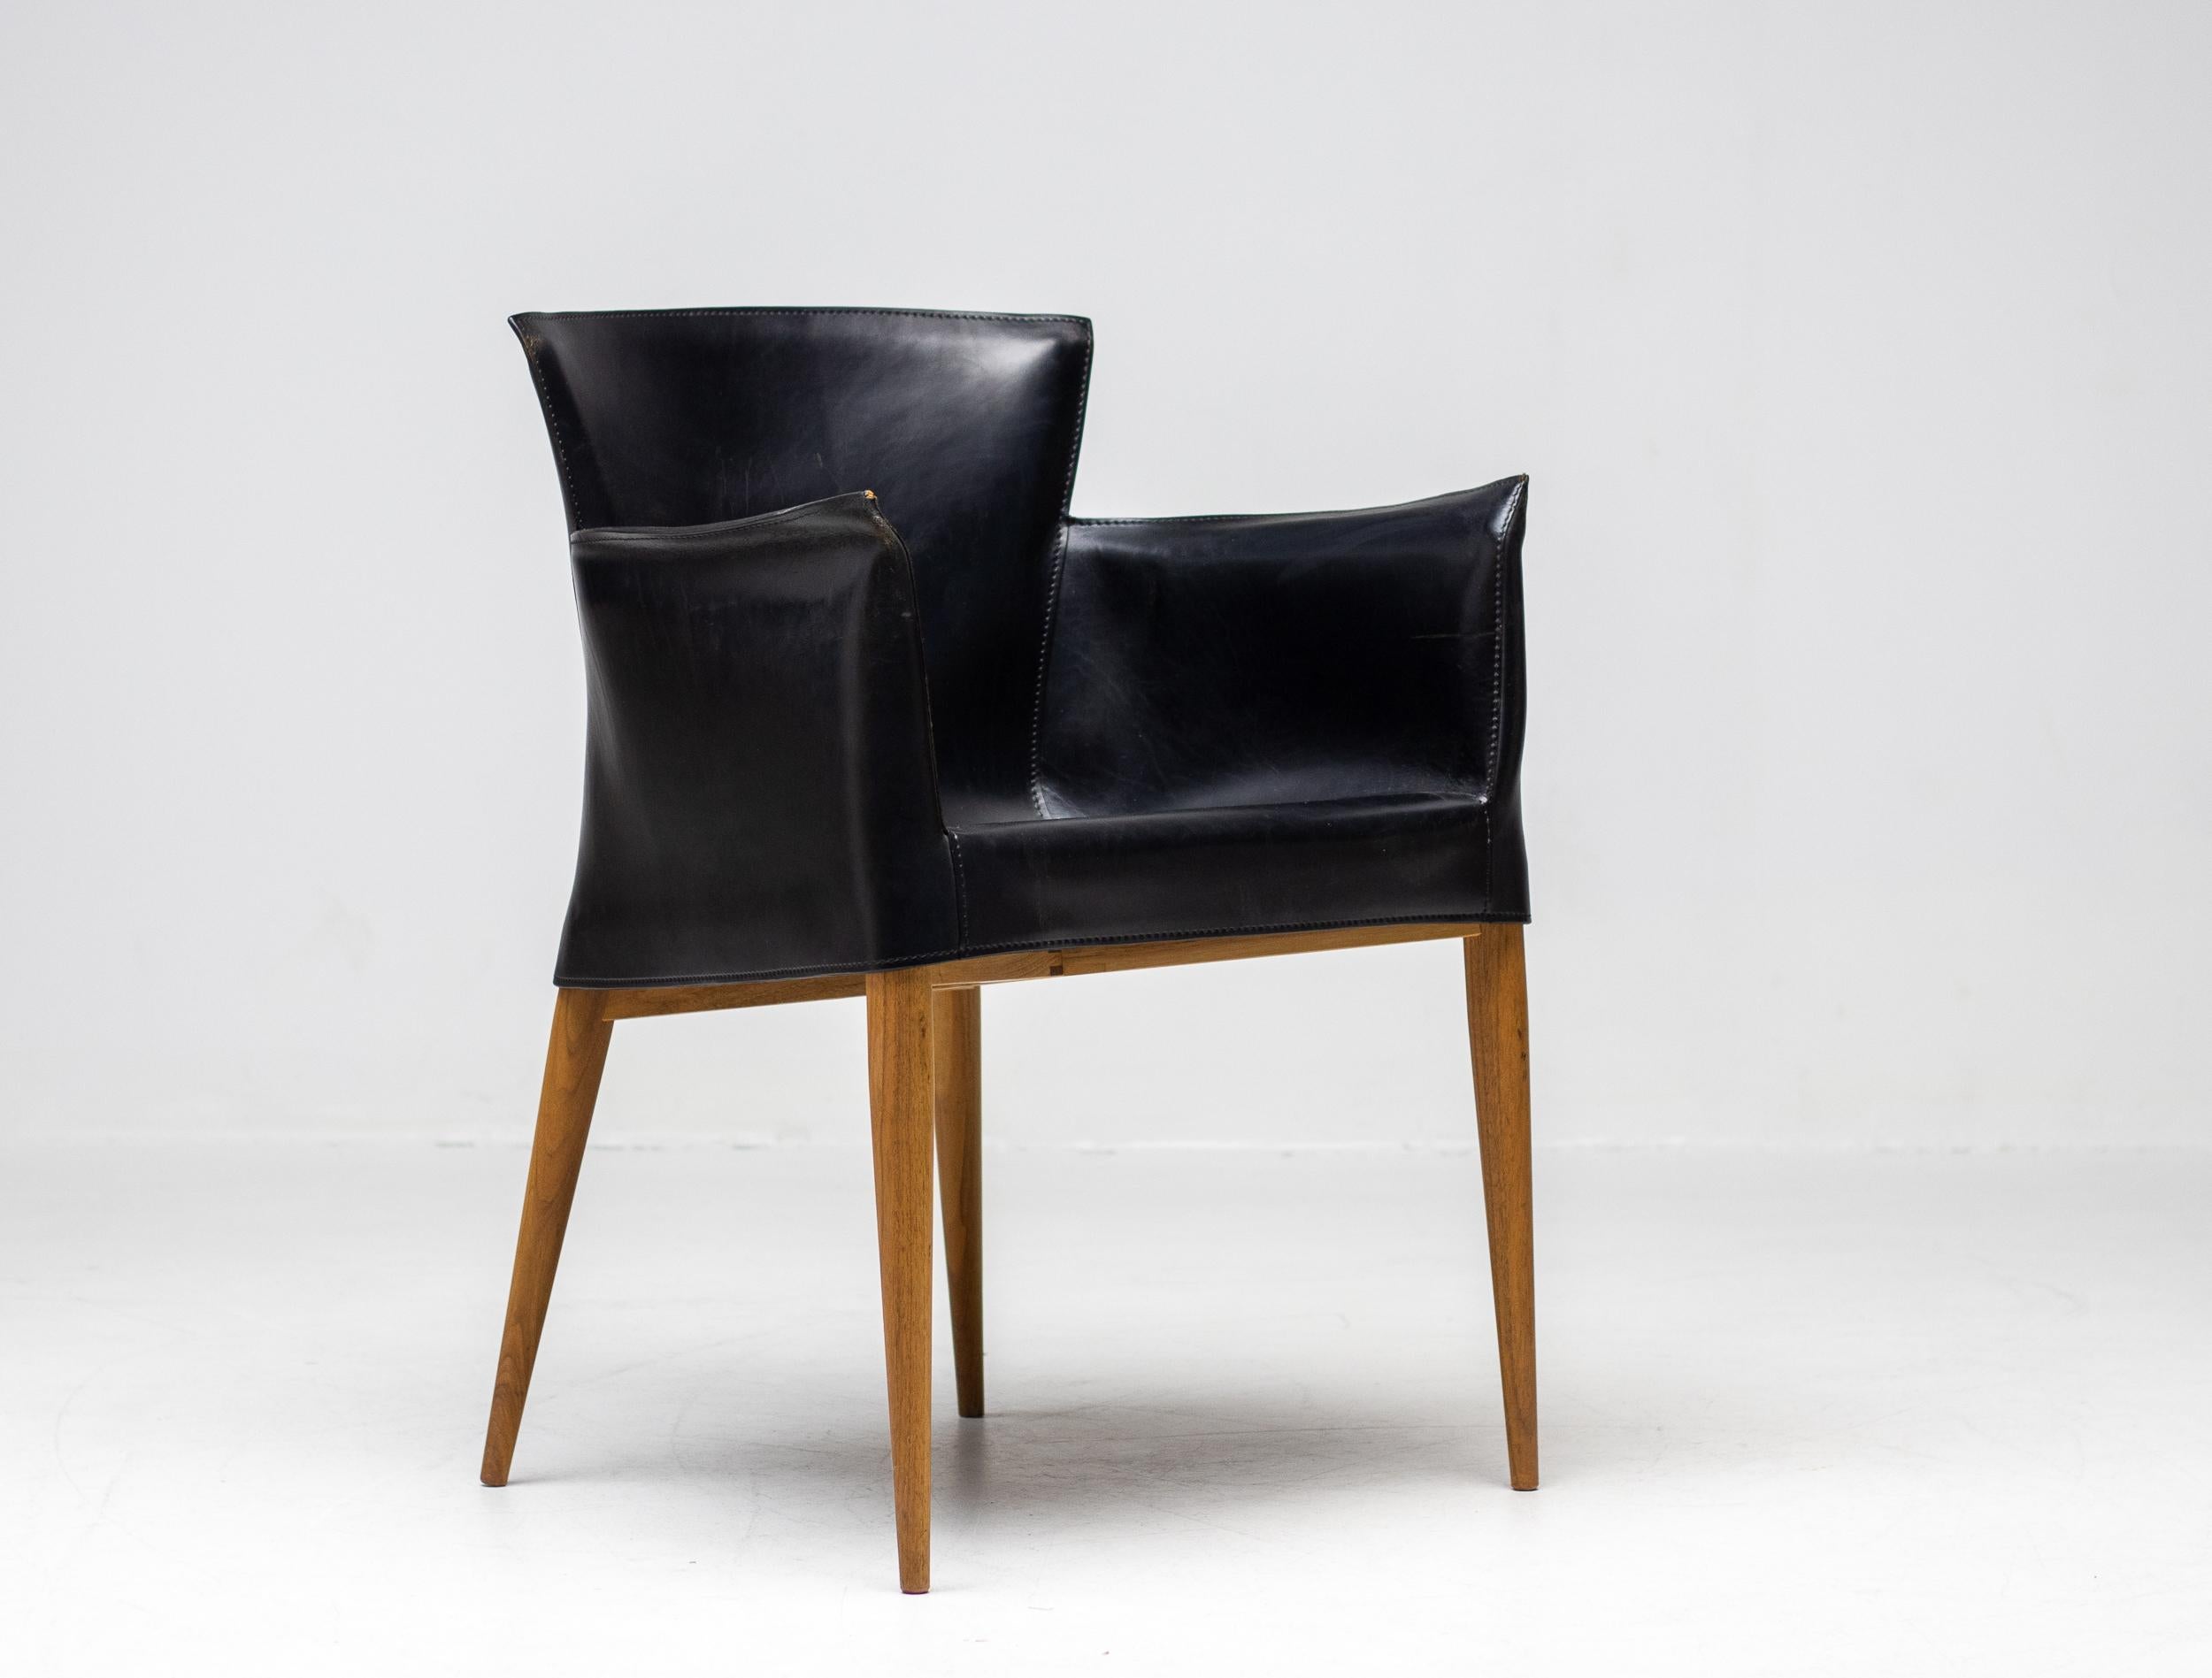 Rare Carlo Bartoli for Matteo Grassi Vela armchairs in black Italian leather, made in Italy, circa 1980.
High-end chair consisting of handstitched leather upholstery wrapped over an internal walnut frame. 
The design of this chair is inspired by how